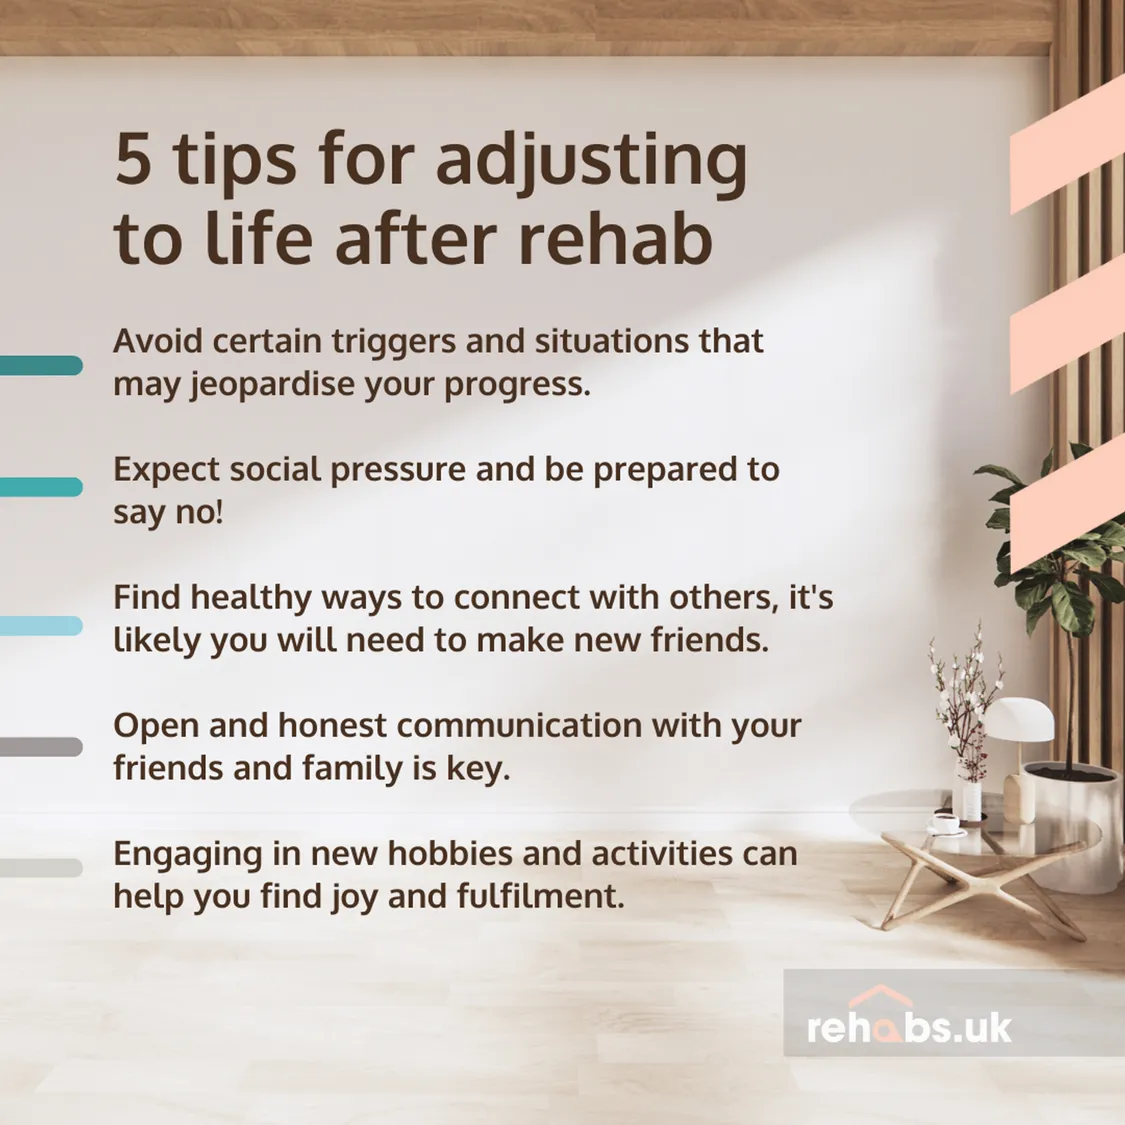 5 Tips for adjusting to life after rehab: Avoid certain triggers and situations that may jeopardise your progress.  Expect social pressure and be prepared to say no!  Find healthy ways to connect with others, it's likely you will need to make new friends.  Open and honest communication with your friends and family is key.  Engaging in new hobbies and activities can help you find joy and fulfilment.